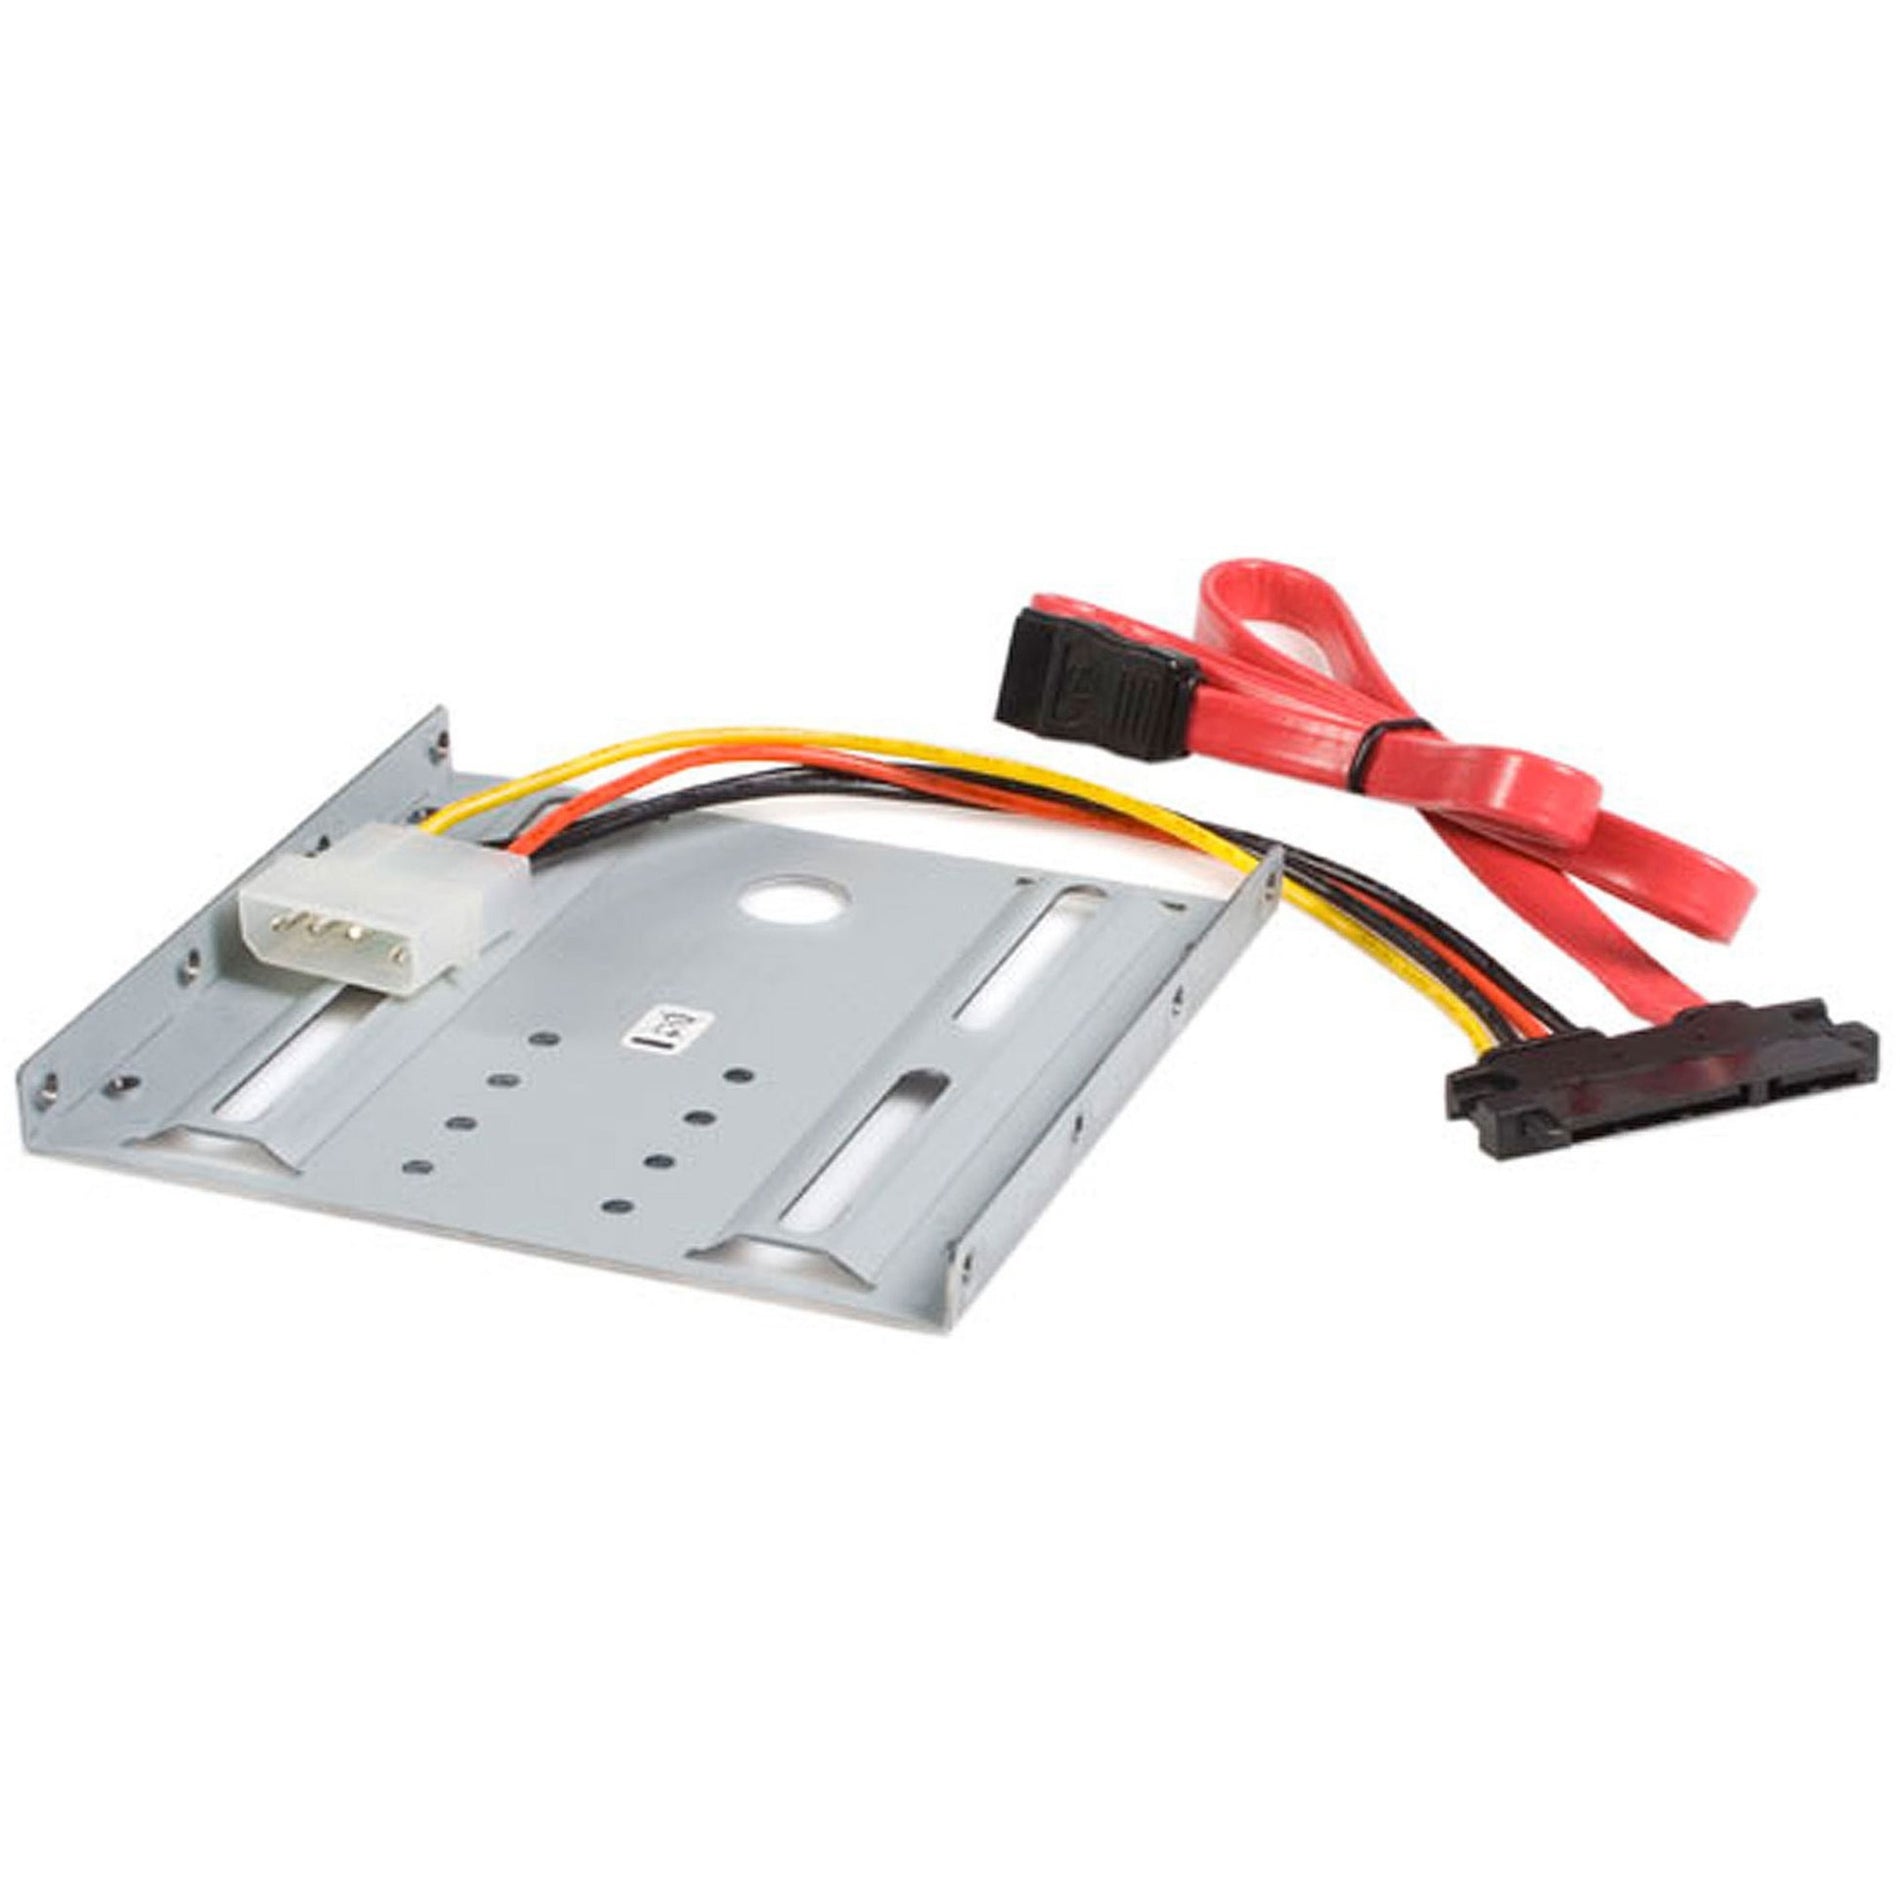 StarTech.com BRACKET25SAT 2.5in Hard Drive to 3.5in Drive Bay Mounting Kit, Secure and Reliable Mounting Solution